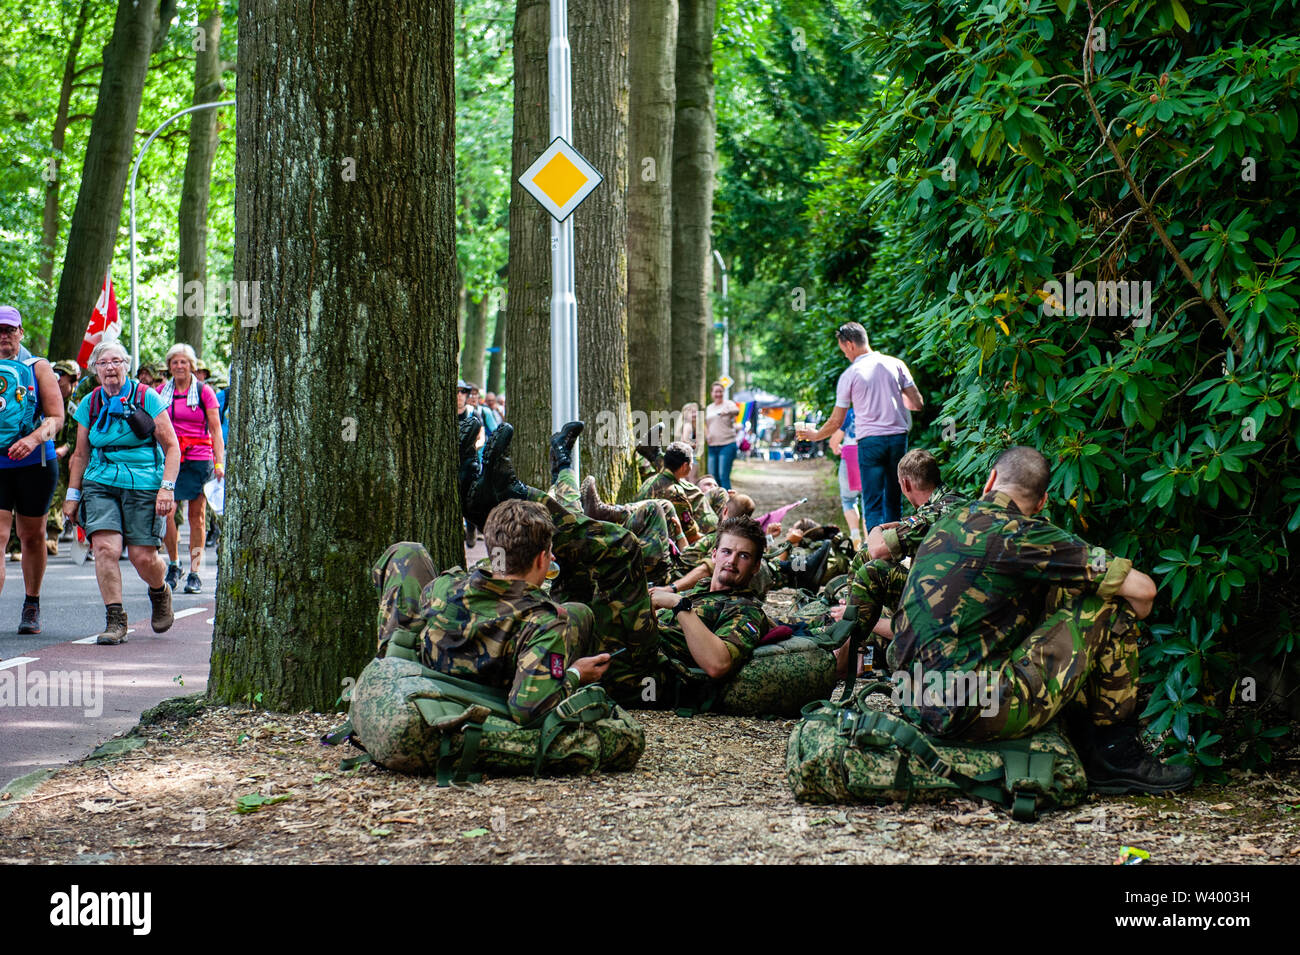 A group of soldiers rest during the third day.Since it is the world’s biggest multi-day walking event, the Four Days March is seen as the prime example of sportsmanship and international bonding between military servicemen and women and civilians from many different countries. The third day route is much known because of its seven hills, which are always a challenge to walkers. Some of the neighbourhoods of Nijmegen celebrate the arrival of the walkers by decorating the exteriors of houses and having great parties, which is always a very warm welcome to the participants. Stock Photo